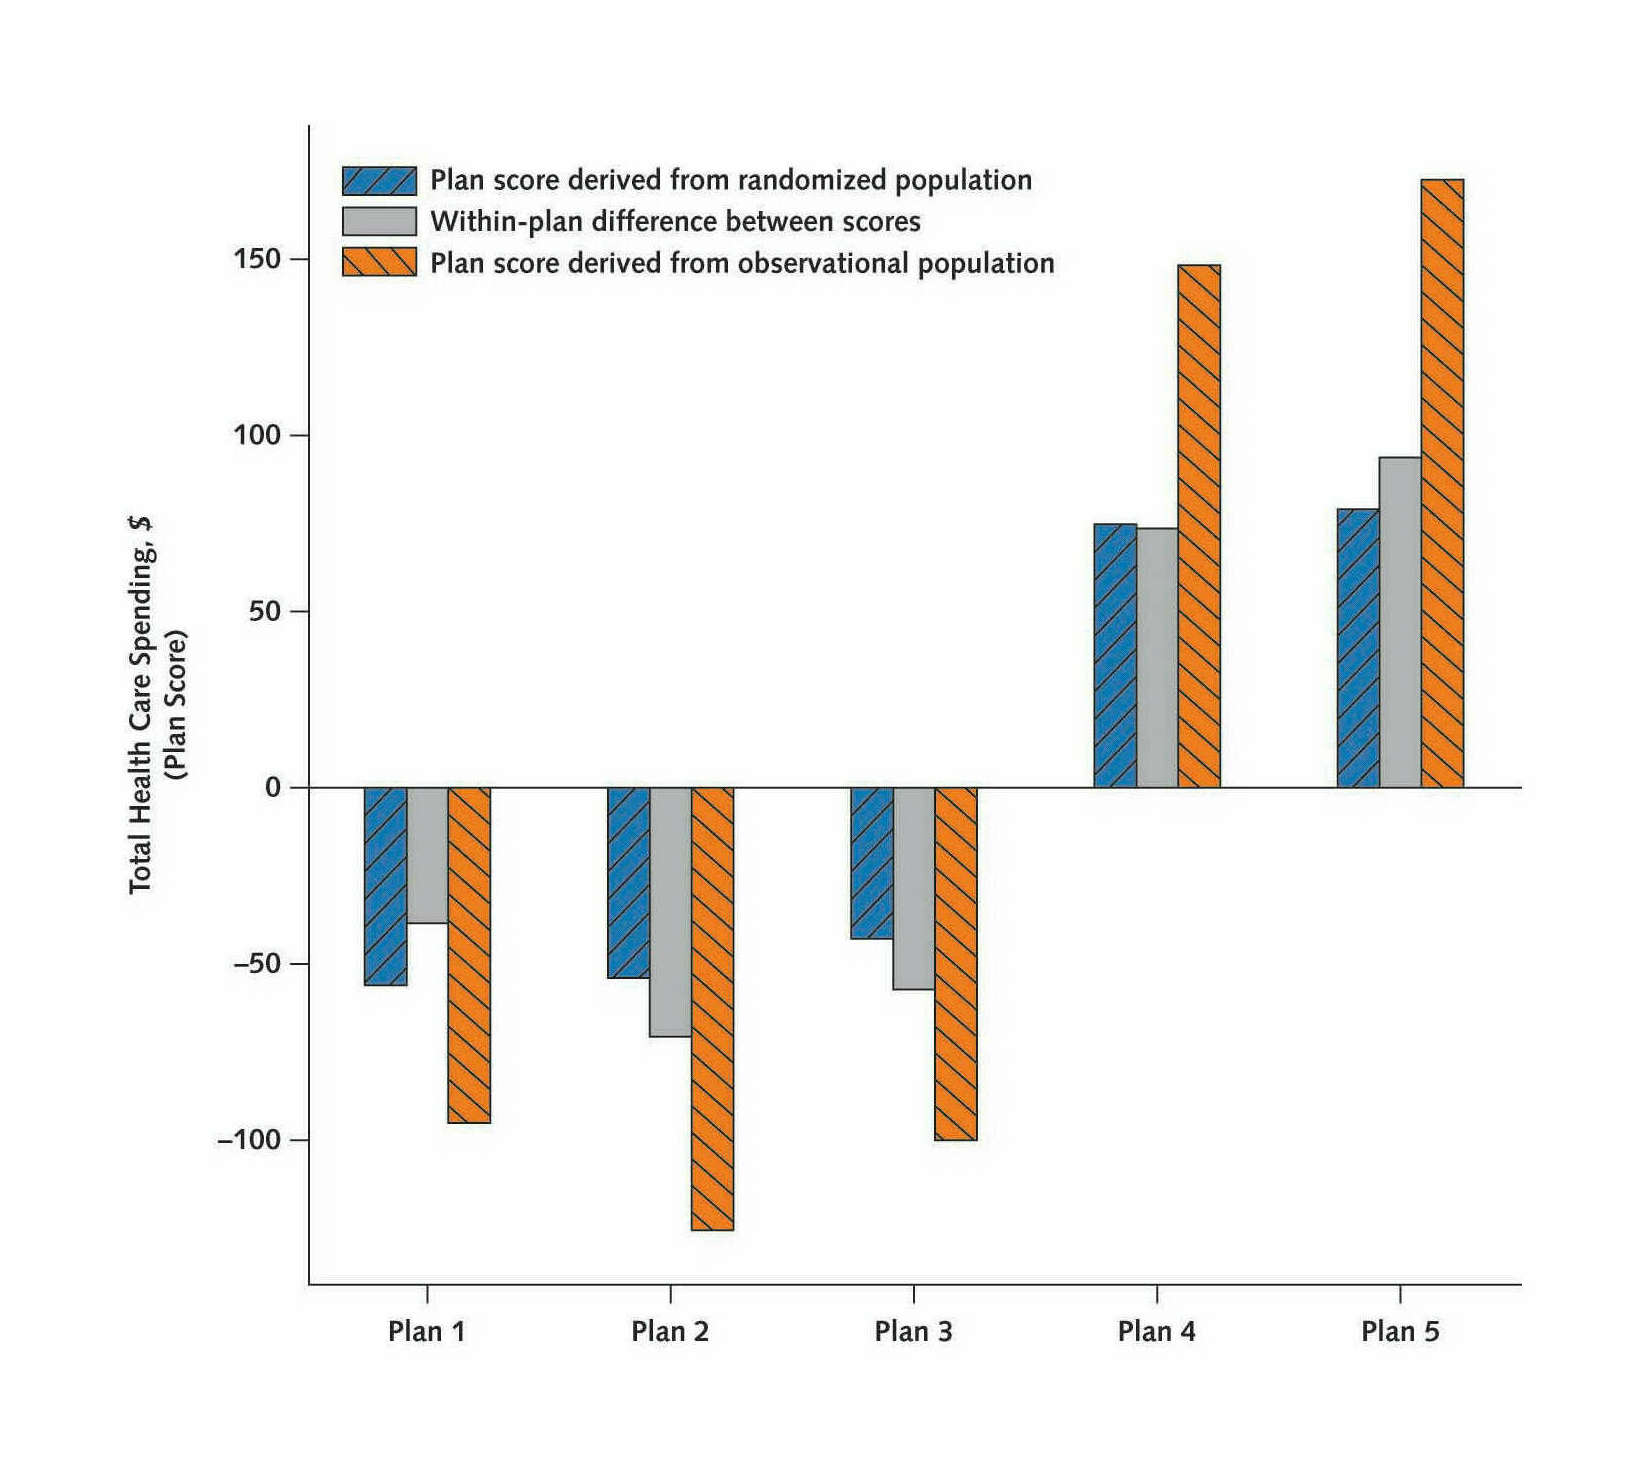 Figure 1: Differences in plan total health care spending scores derived from the observational and randomized populations. Each bar corresponds to 1 of the 5 plans. The blue area of the bar corresponds to a plan’s randomized spending score (relative to the “average” plan mean) based on the randomly assigned population. The orange bar corresponds to a plan’s spending score based on the observational population before risk adjustment. The grey unhatched portion indicates the difference between the 2 scores, or the extent of residual confounding in the observational scores. For these 5 Medicaid plans, higher-cost enrollees selected plans that control spending to a lesser extent. We calculated a plan score for each plan equal to the plan’s deviation from the population-specific plan mean. We compared plan scores between the 2 populations, instead of raw plan means, because population means differed somewhat. Thus, we compared how a plan performed relative to other plans in 1 population with its relative performance in the other population.